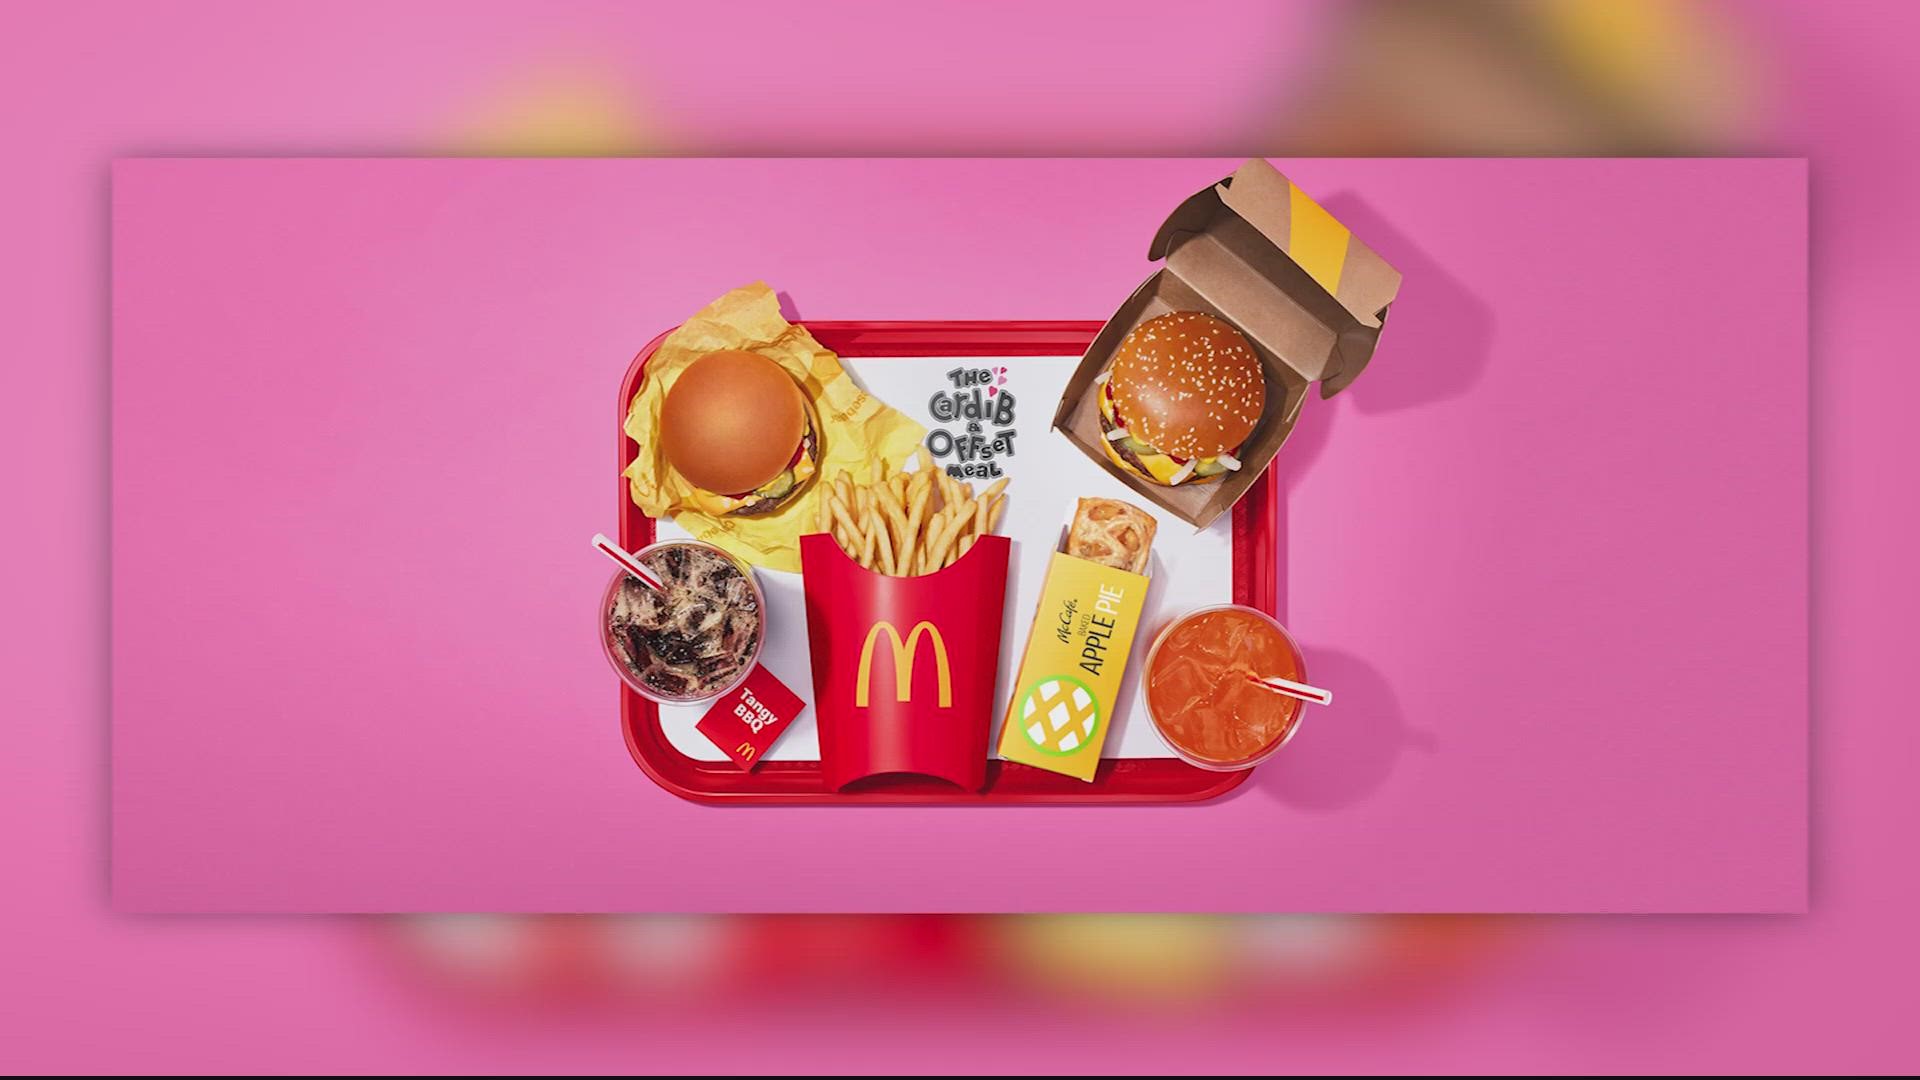 The fast-food chain announced its partnership with the couple on the "Cardi B and Offset" meal. The collaboration marks McDonald's first celebrity duo meal.